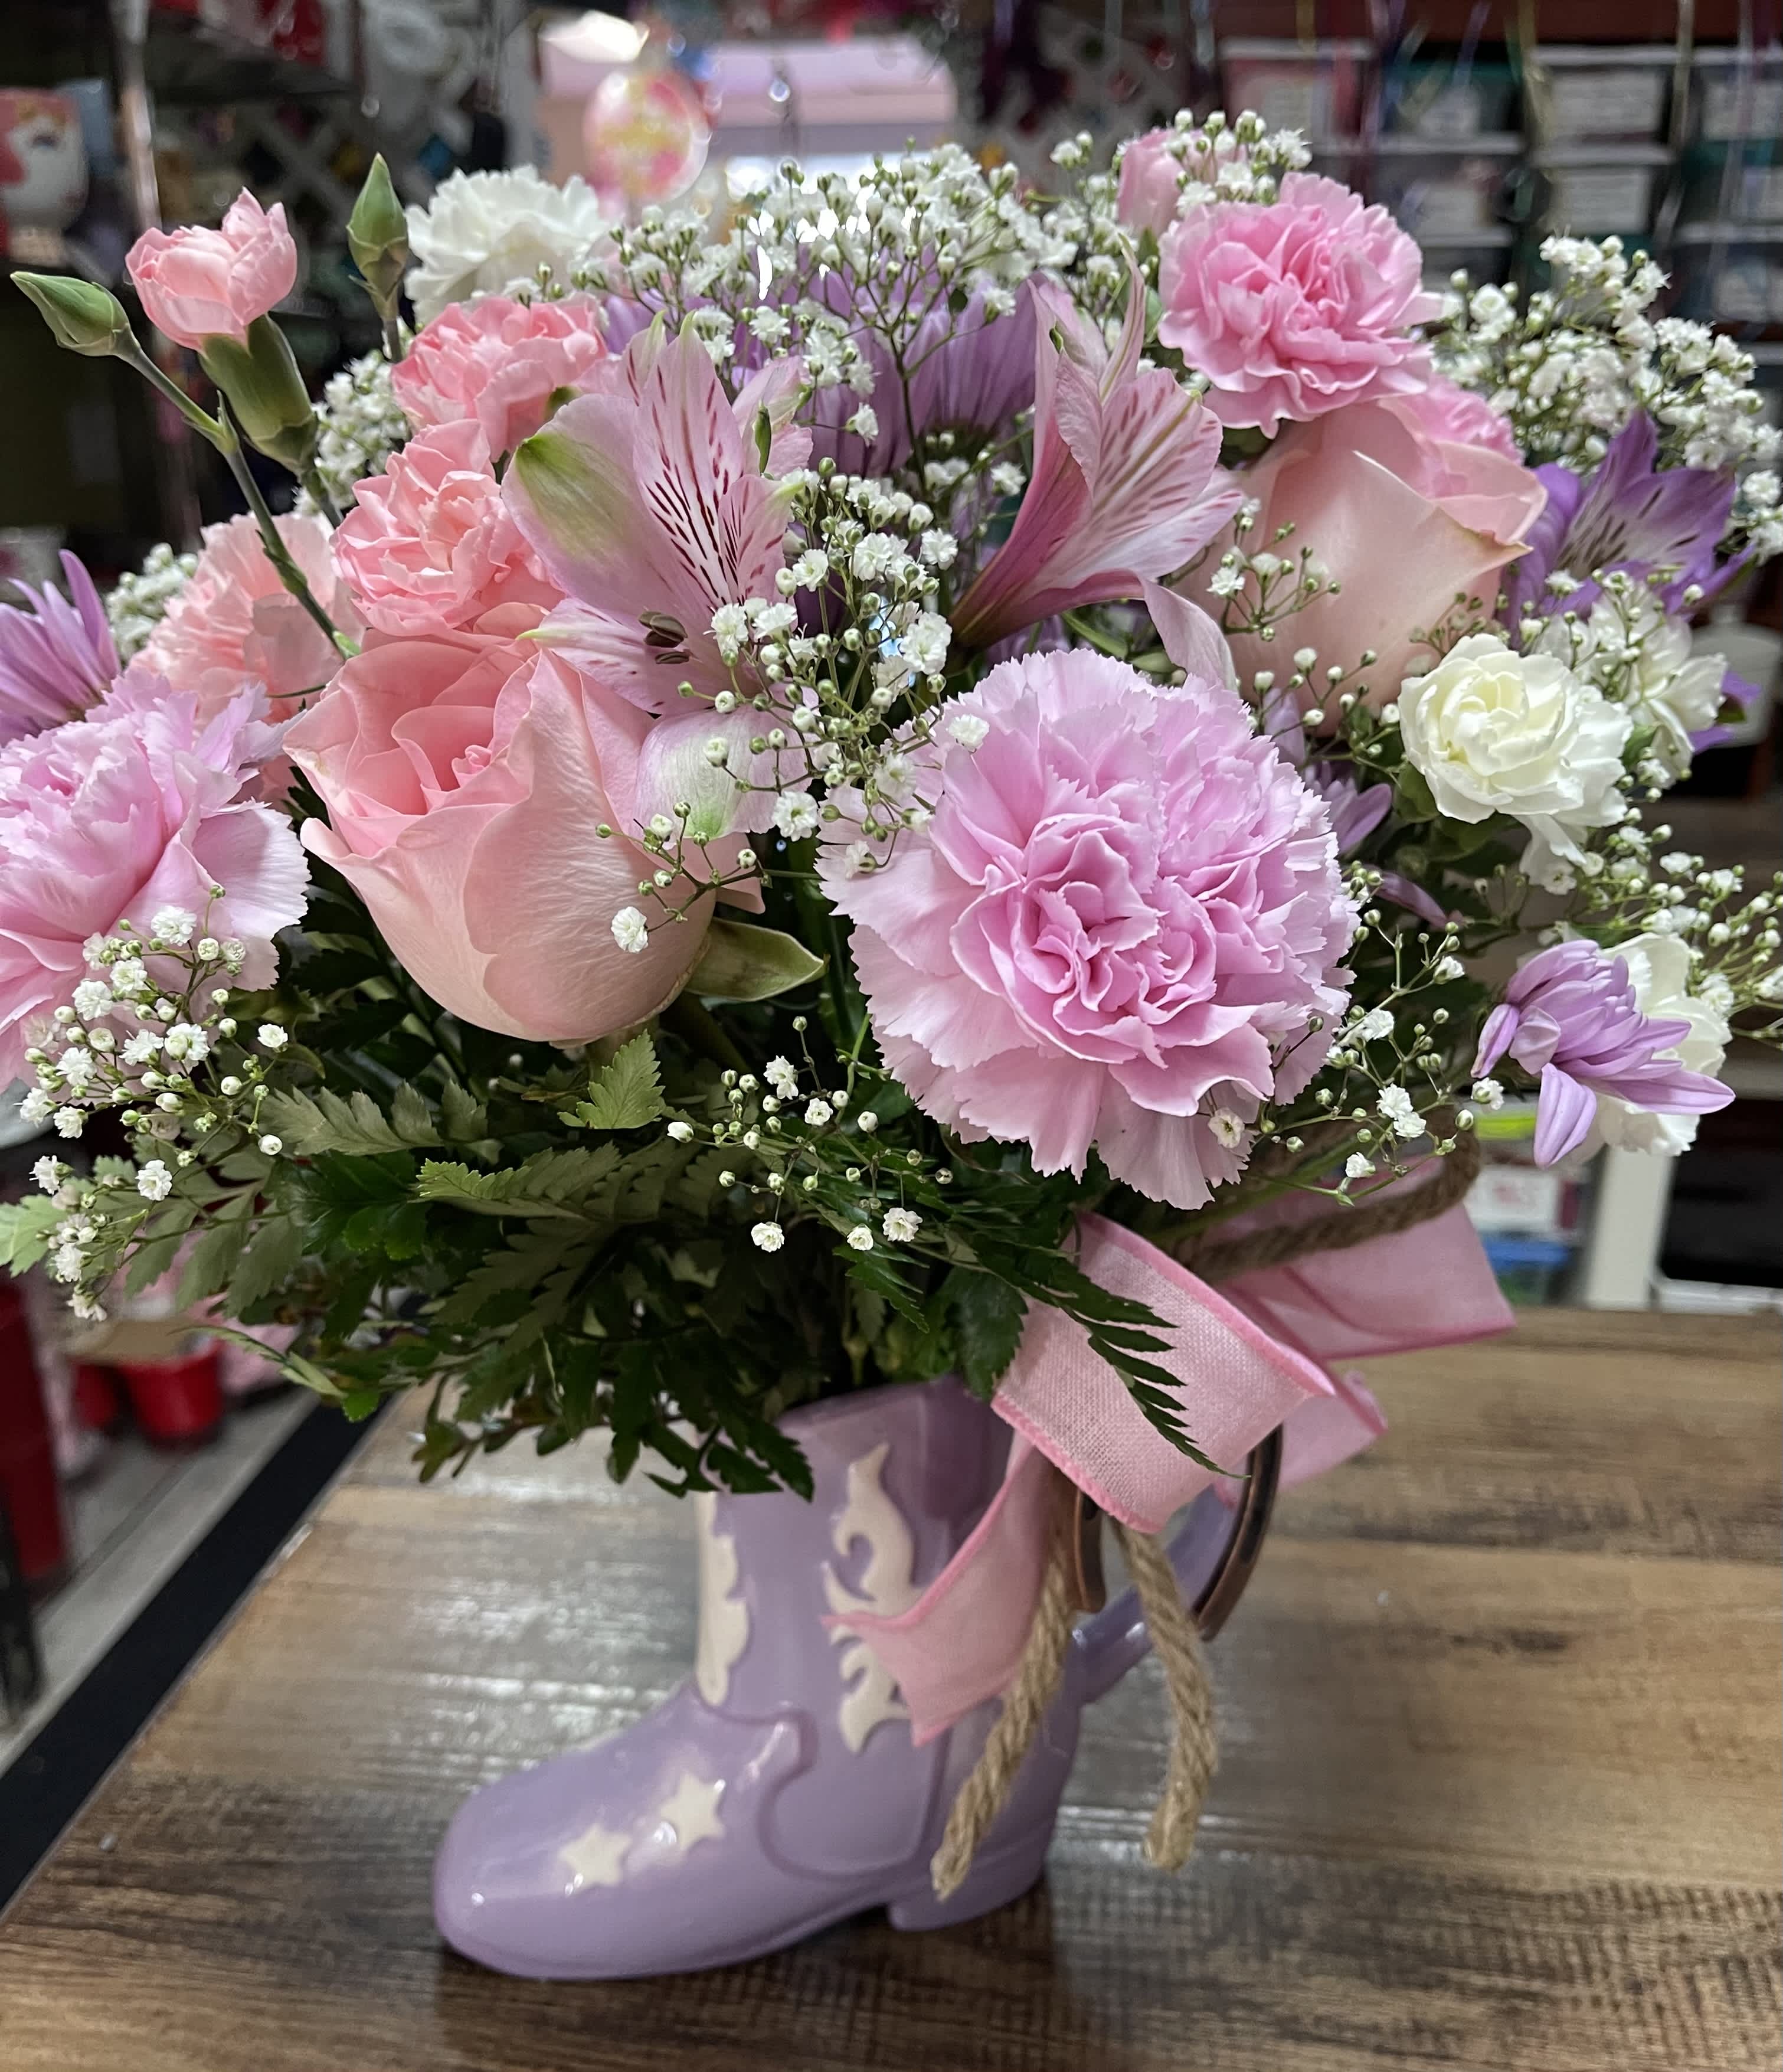 LONE STAR - WESTERNS ARE STORIES ABOUT COWBOYS AND NATIVE AMERICANS. SEND SOMEONE SPECIAL A GIFT OF FLOWERS WITH MEANING!! COWGIRLS!!